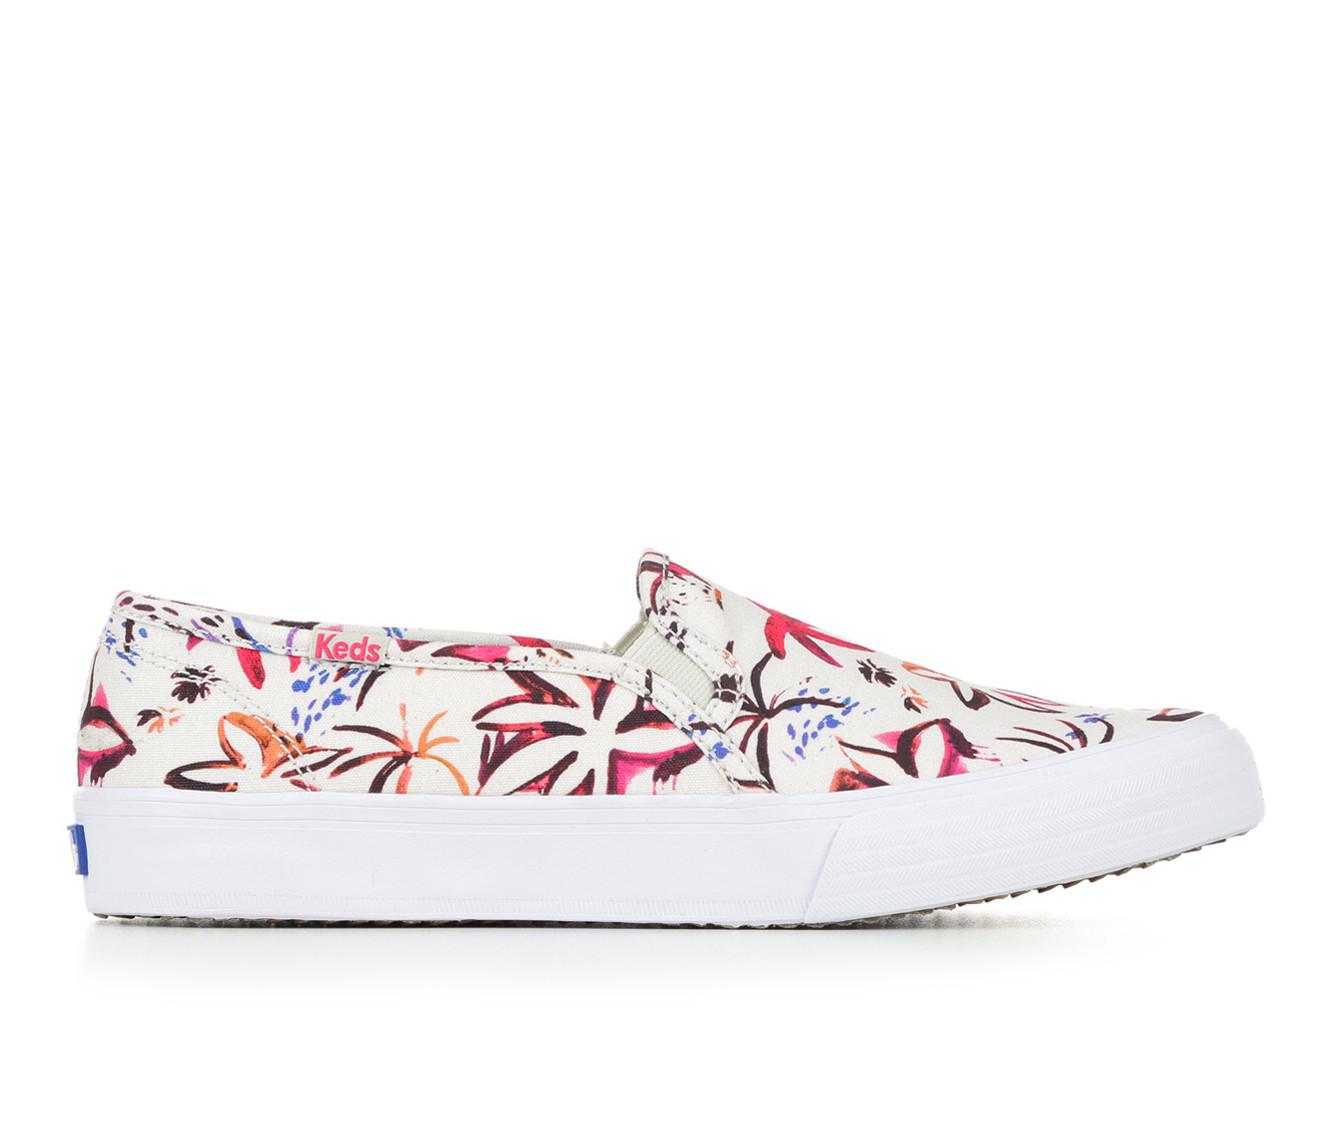 Keds Shoes & Slip-On Sneakers | Shoe Carnival